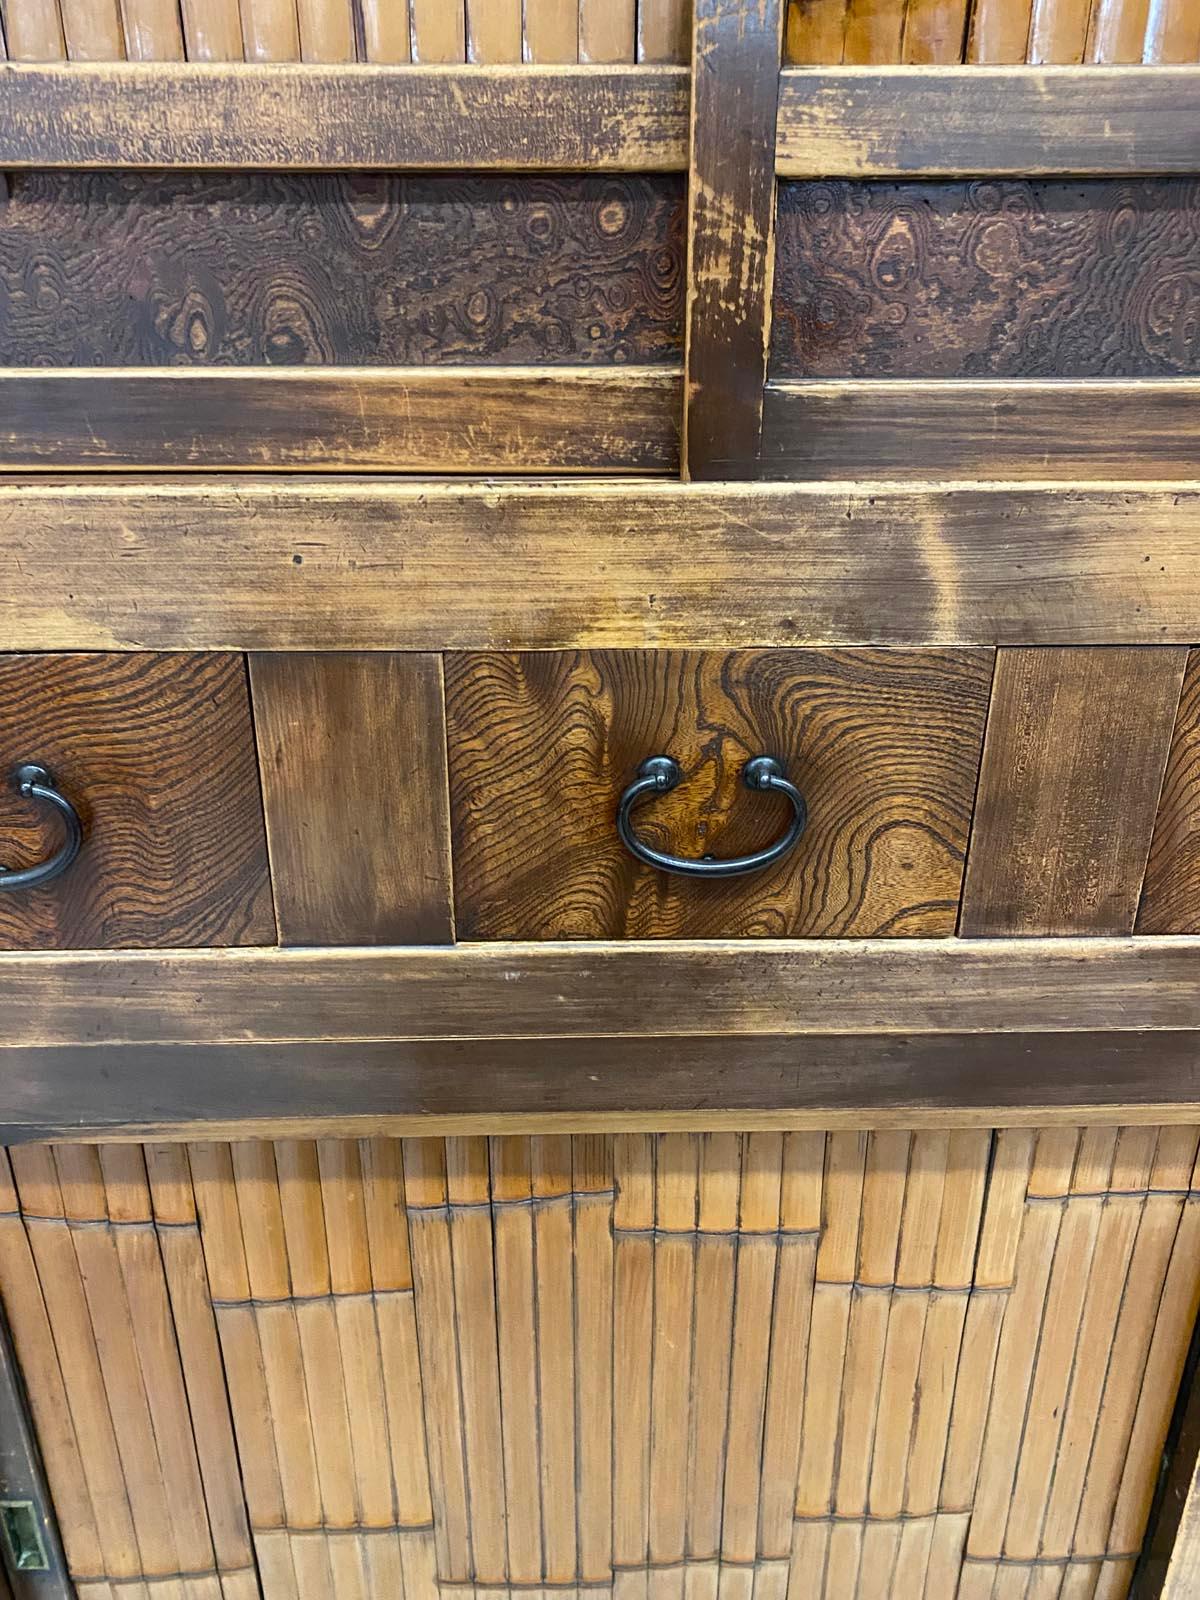 Early 20th c. bamboo and hinoki wood Japanese shop cabinet, two pieces. Sliding doors. All original including interior shelves.  The piece consists of variations of honey color brown using bamboo and burled wood as design accents on the two sliding